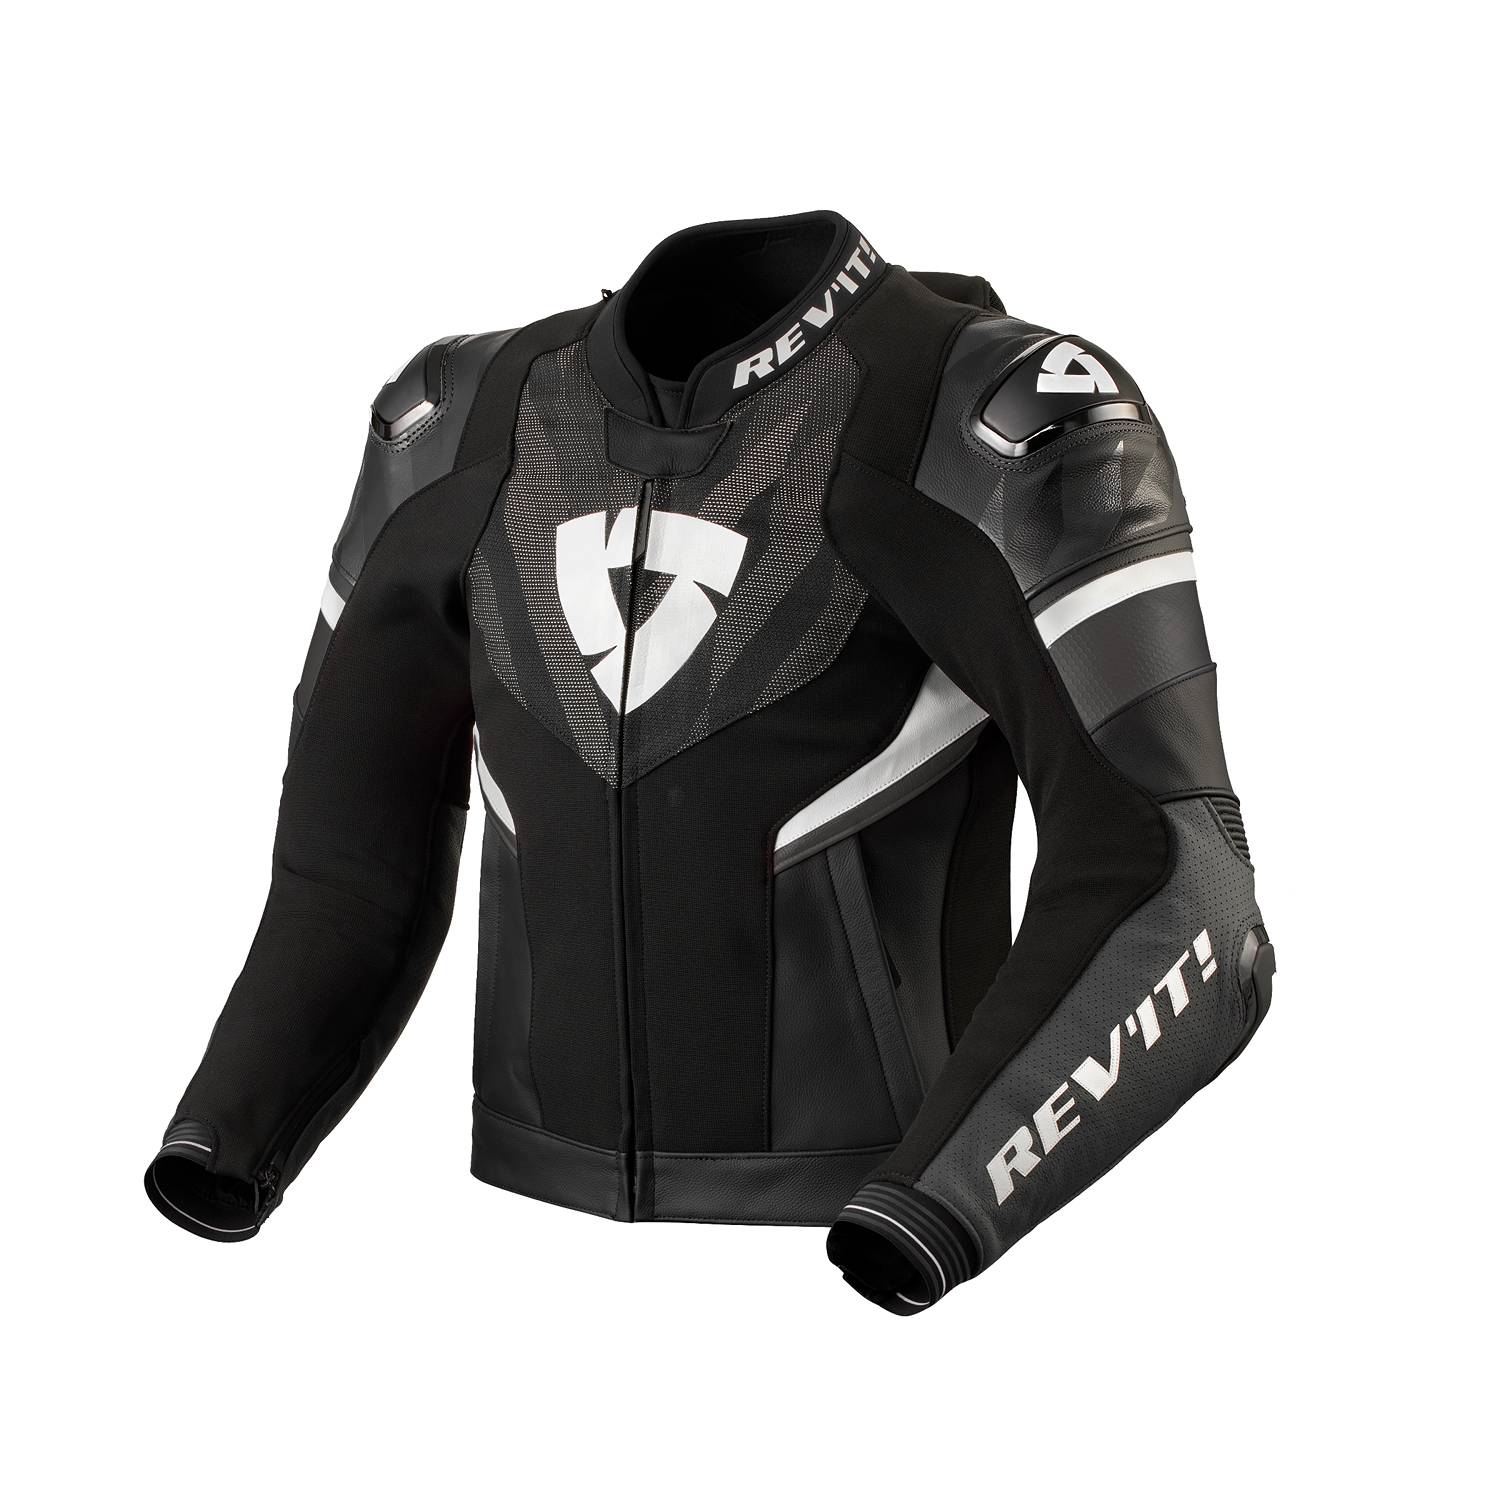 Image of REV'IT! Hyperspeed 2 Pro Veste Noir Anthracite Taille 48